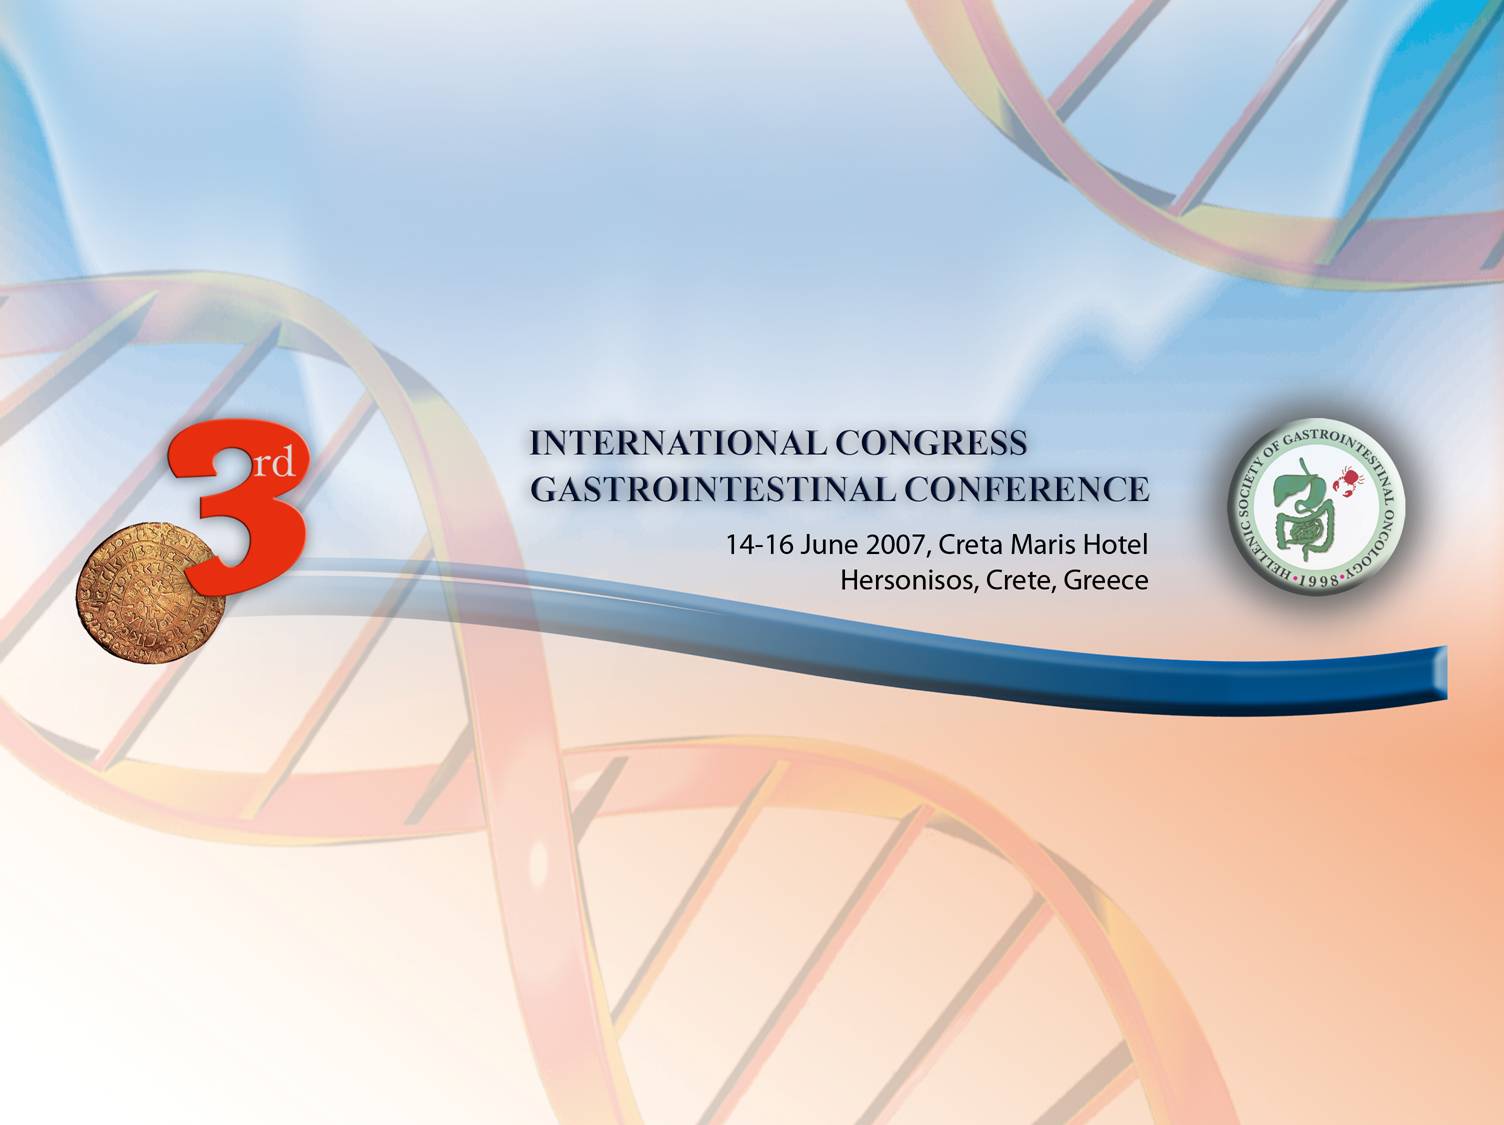 3rd International Congress on Gastrointestinal Oncology, 2007